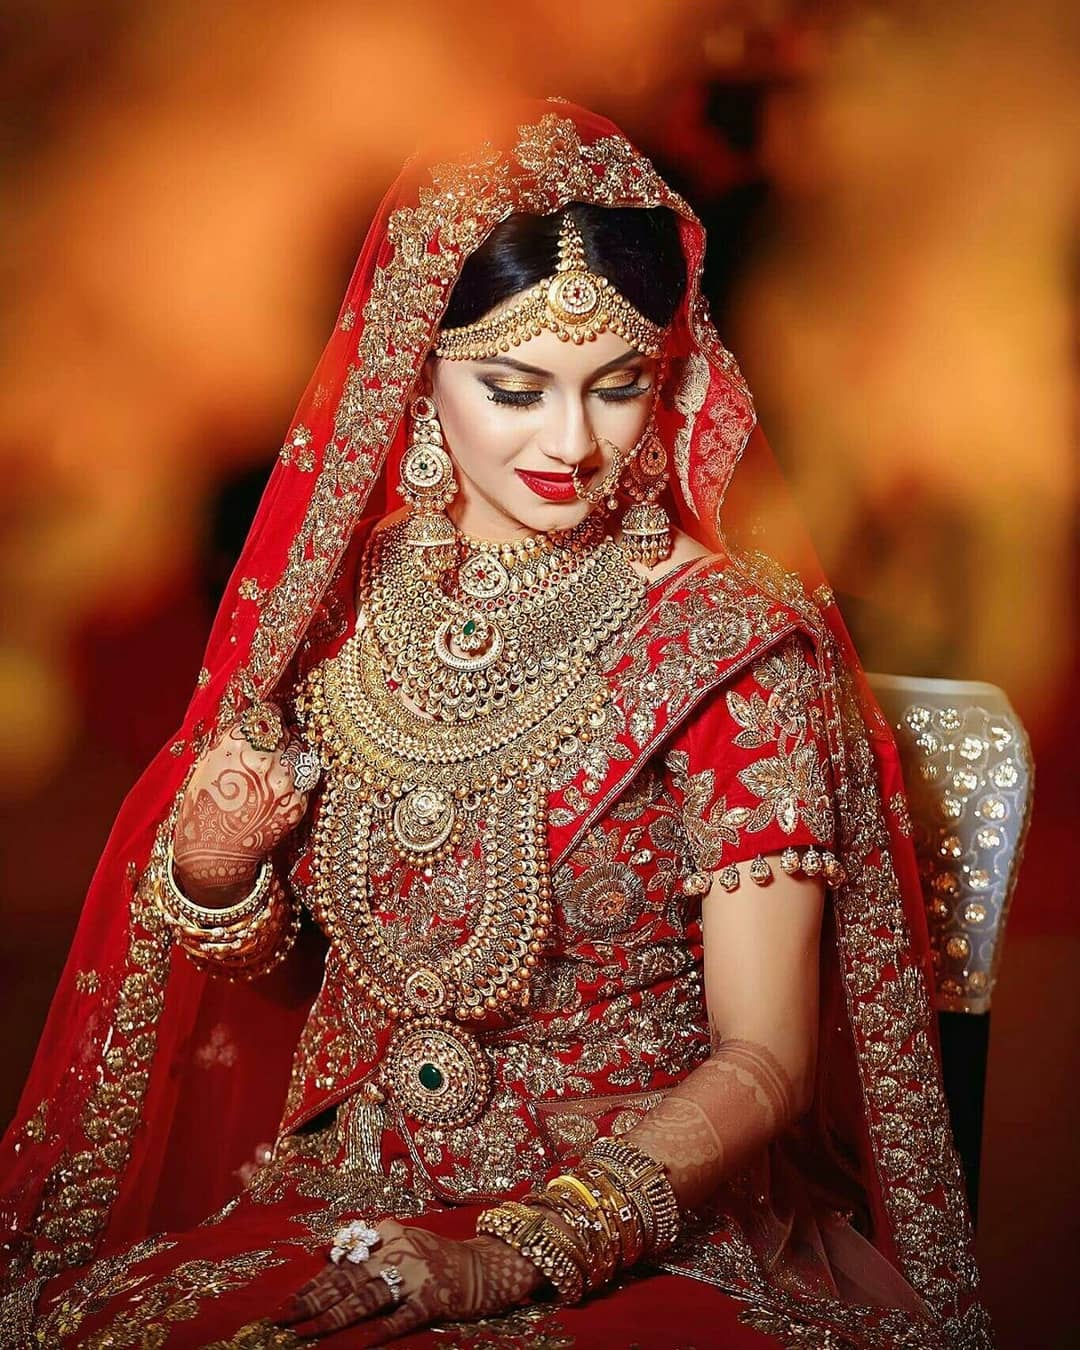 An Amazing Collection of Over 999 Bridal Makeup Images in Full 4K ...